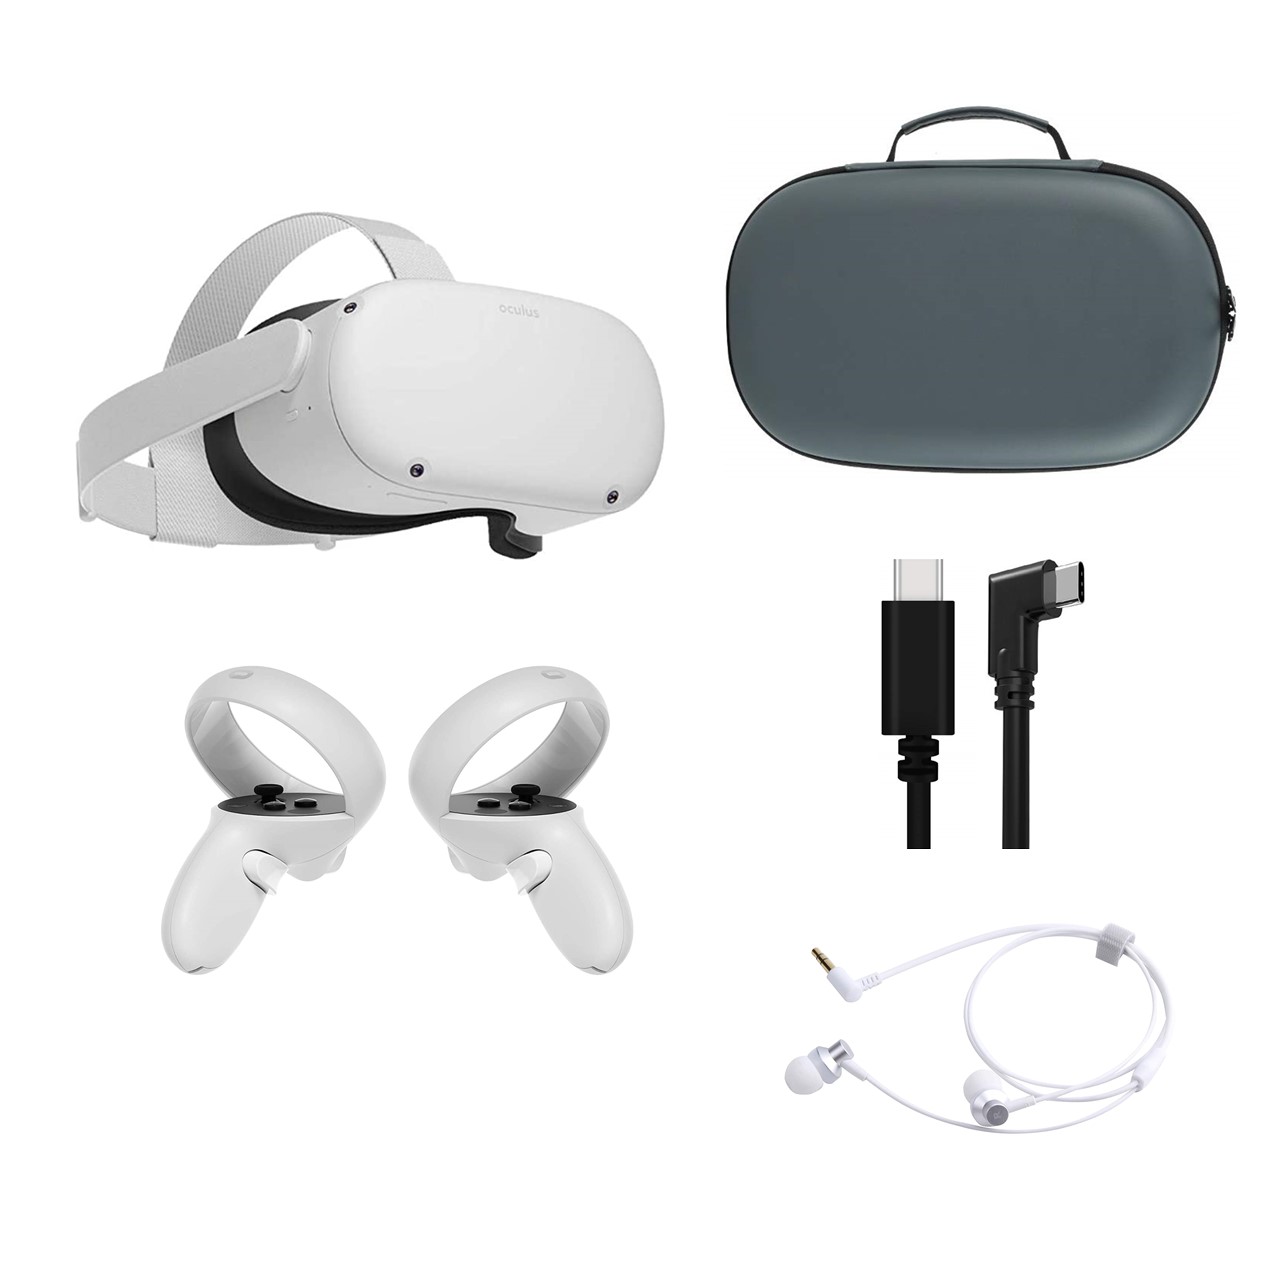 2021 Oculus Quest 2 All-In-One VR Headset, Touch Controllers, 128GB SSD,  1832x1920 up to 90 Hz Refresh Rate LCD, 3D Audio, Mytrix Carrying Case,  Earphone, Link Cable (3M) - Walmart.com